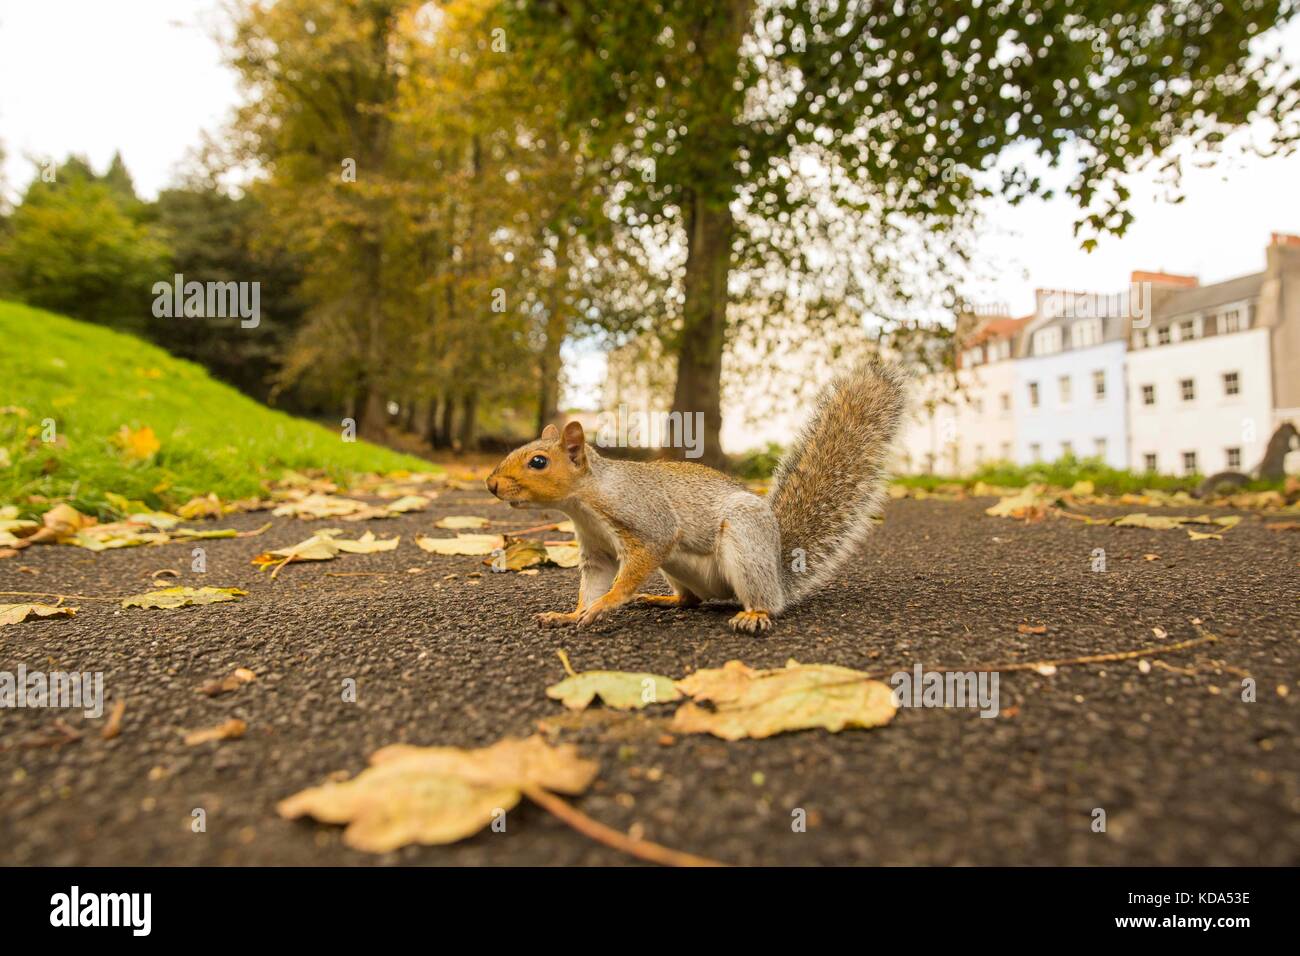 Bristol, England, UK, October 12th 2017. A squirrel approaches the camera in an autumnal Brandon Hill Park. Stock Photo